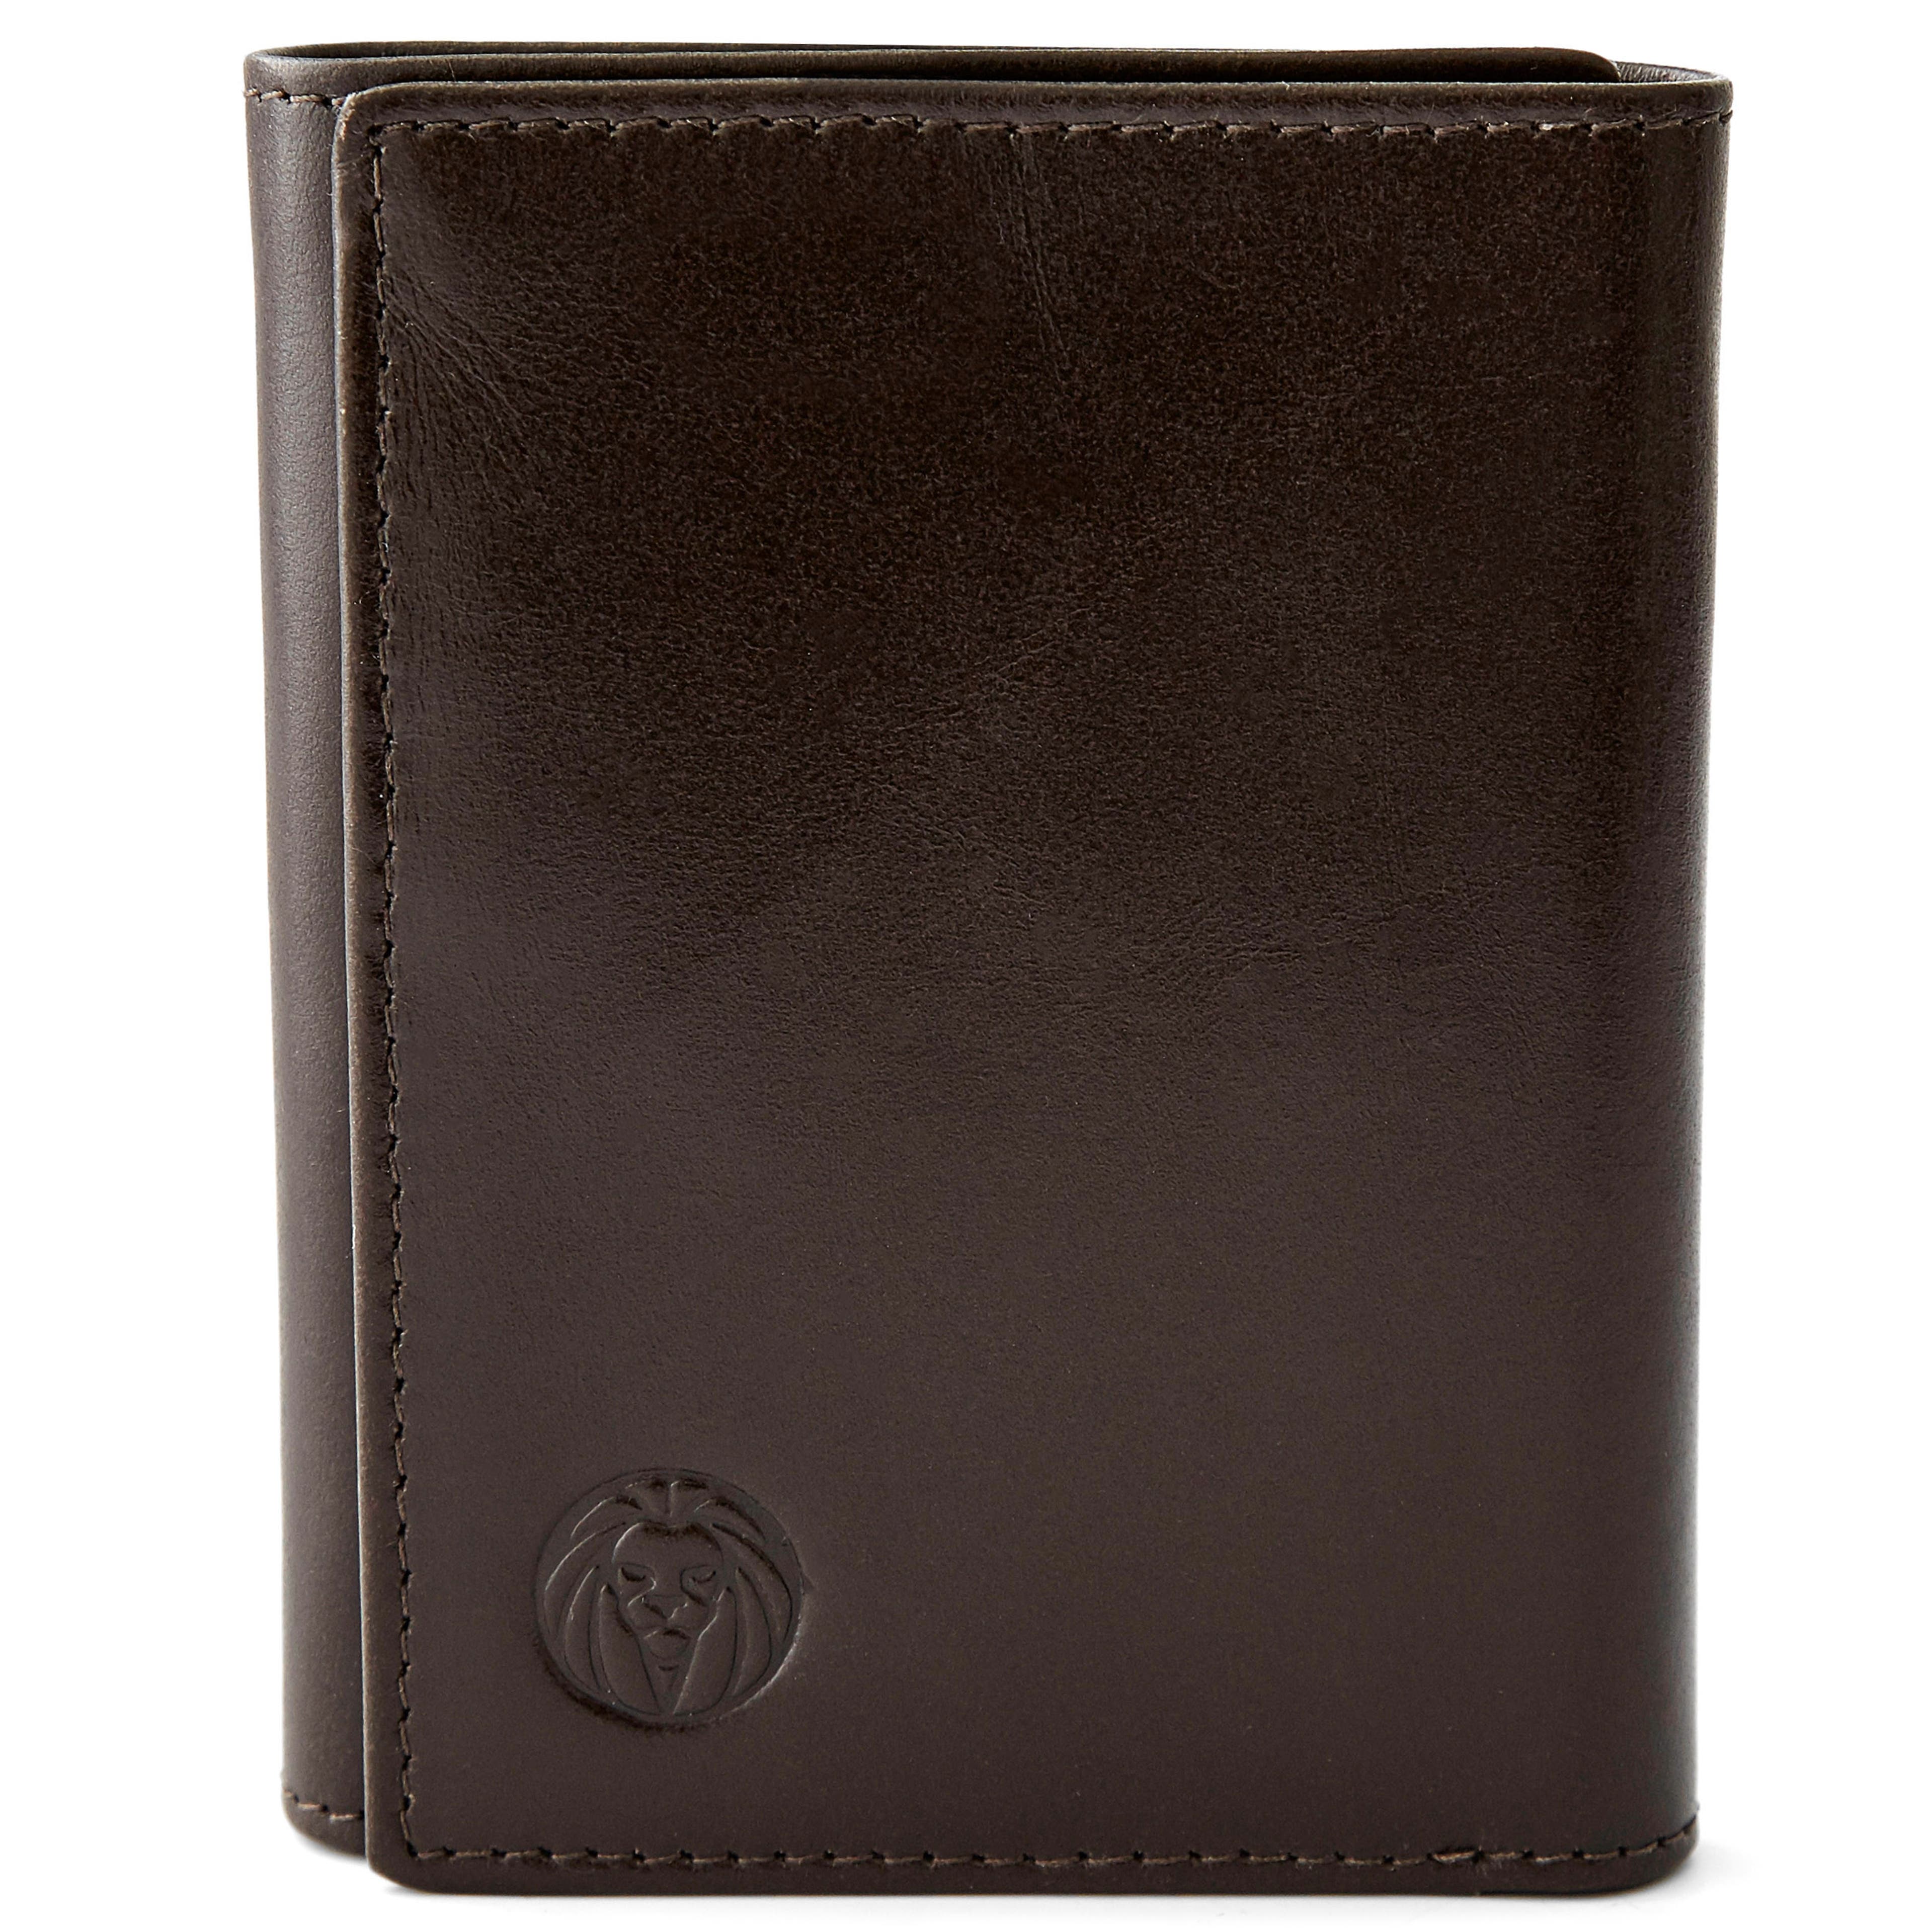 Brown Trifold Wallet with RFID Blocker